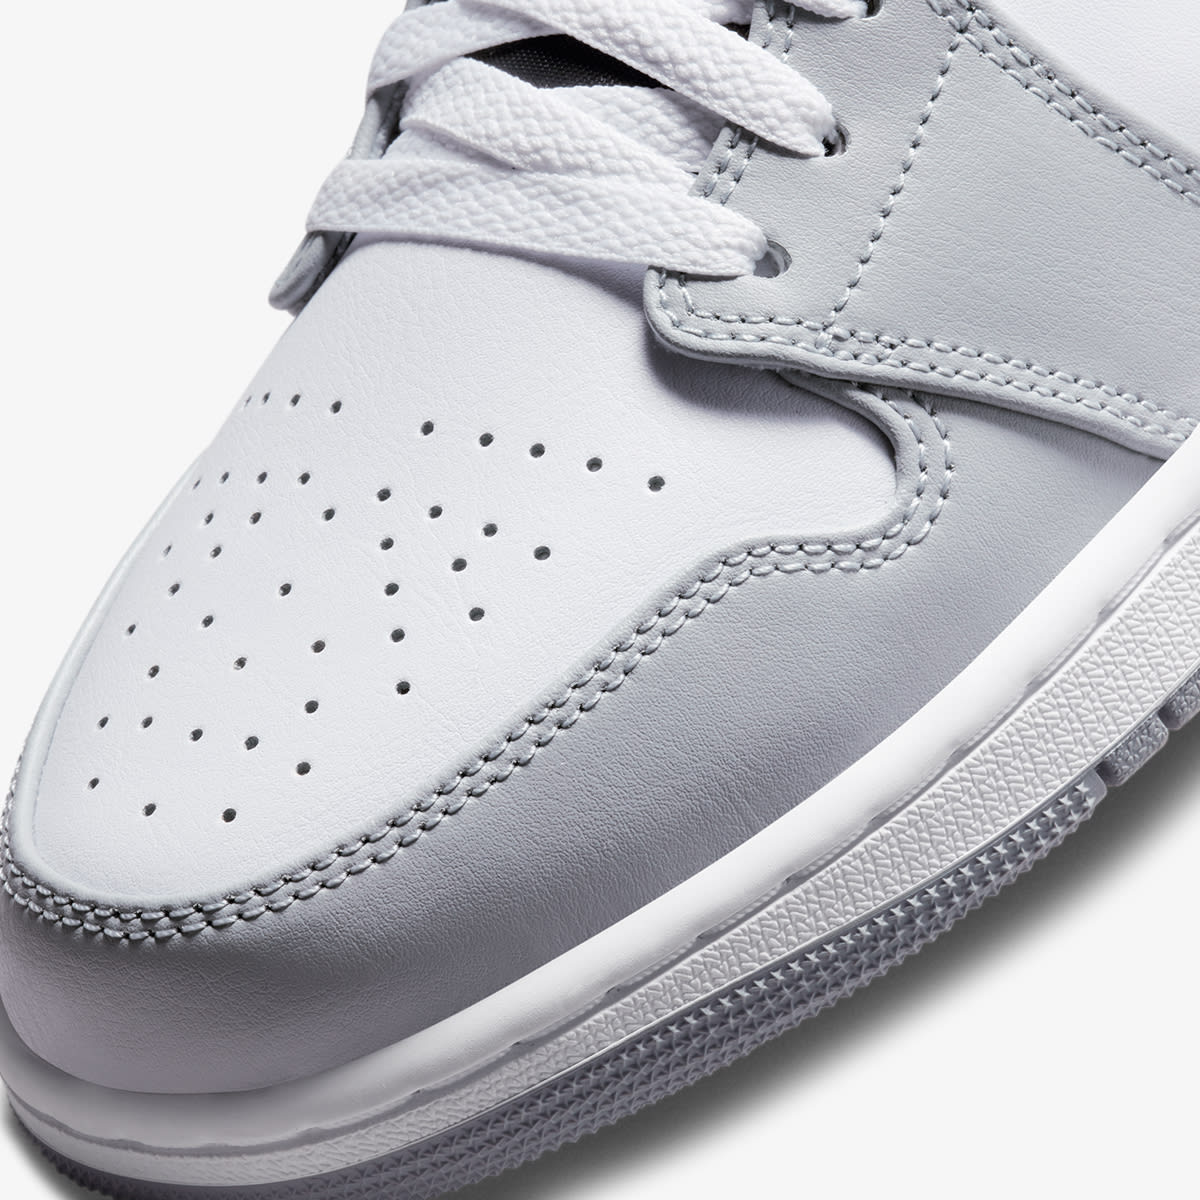 Air Jordan 1 Mid (Grey, White & Anthracite) | END. Launches